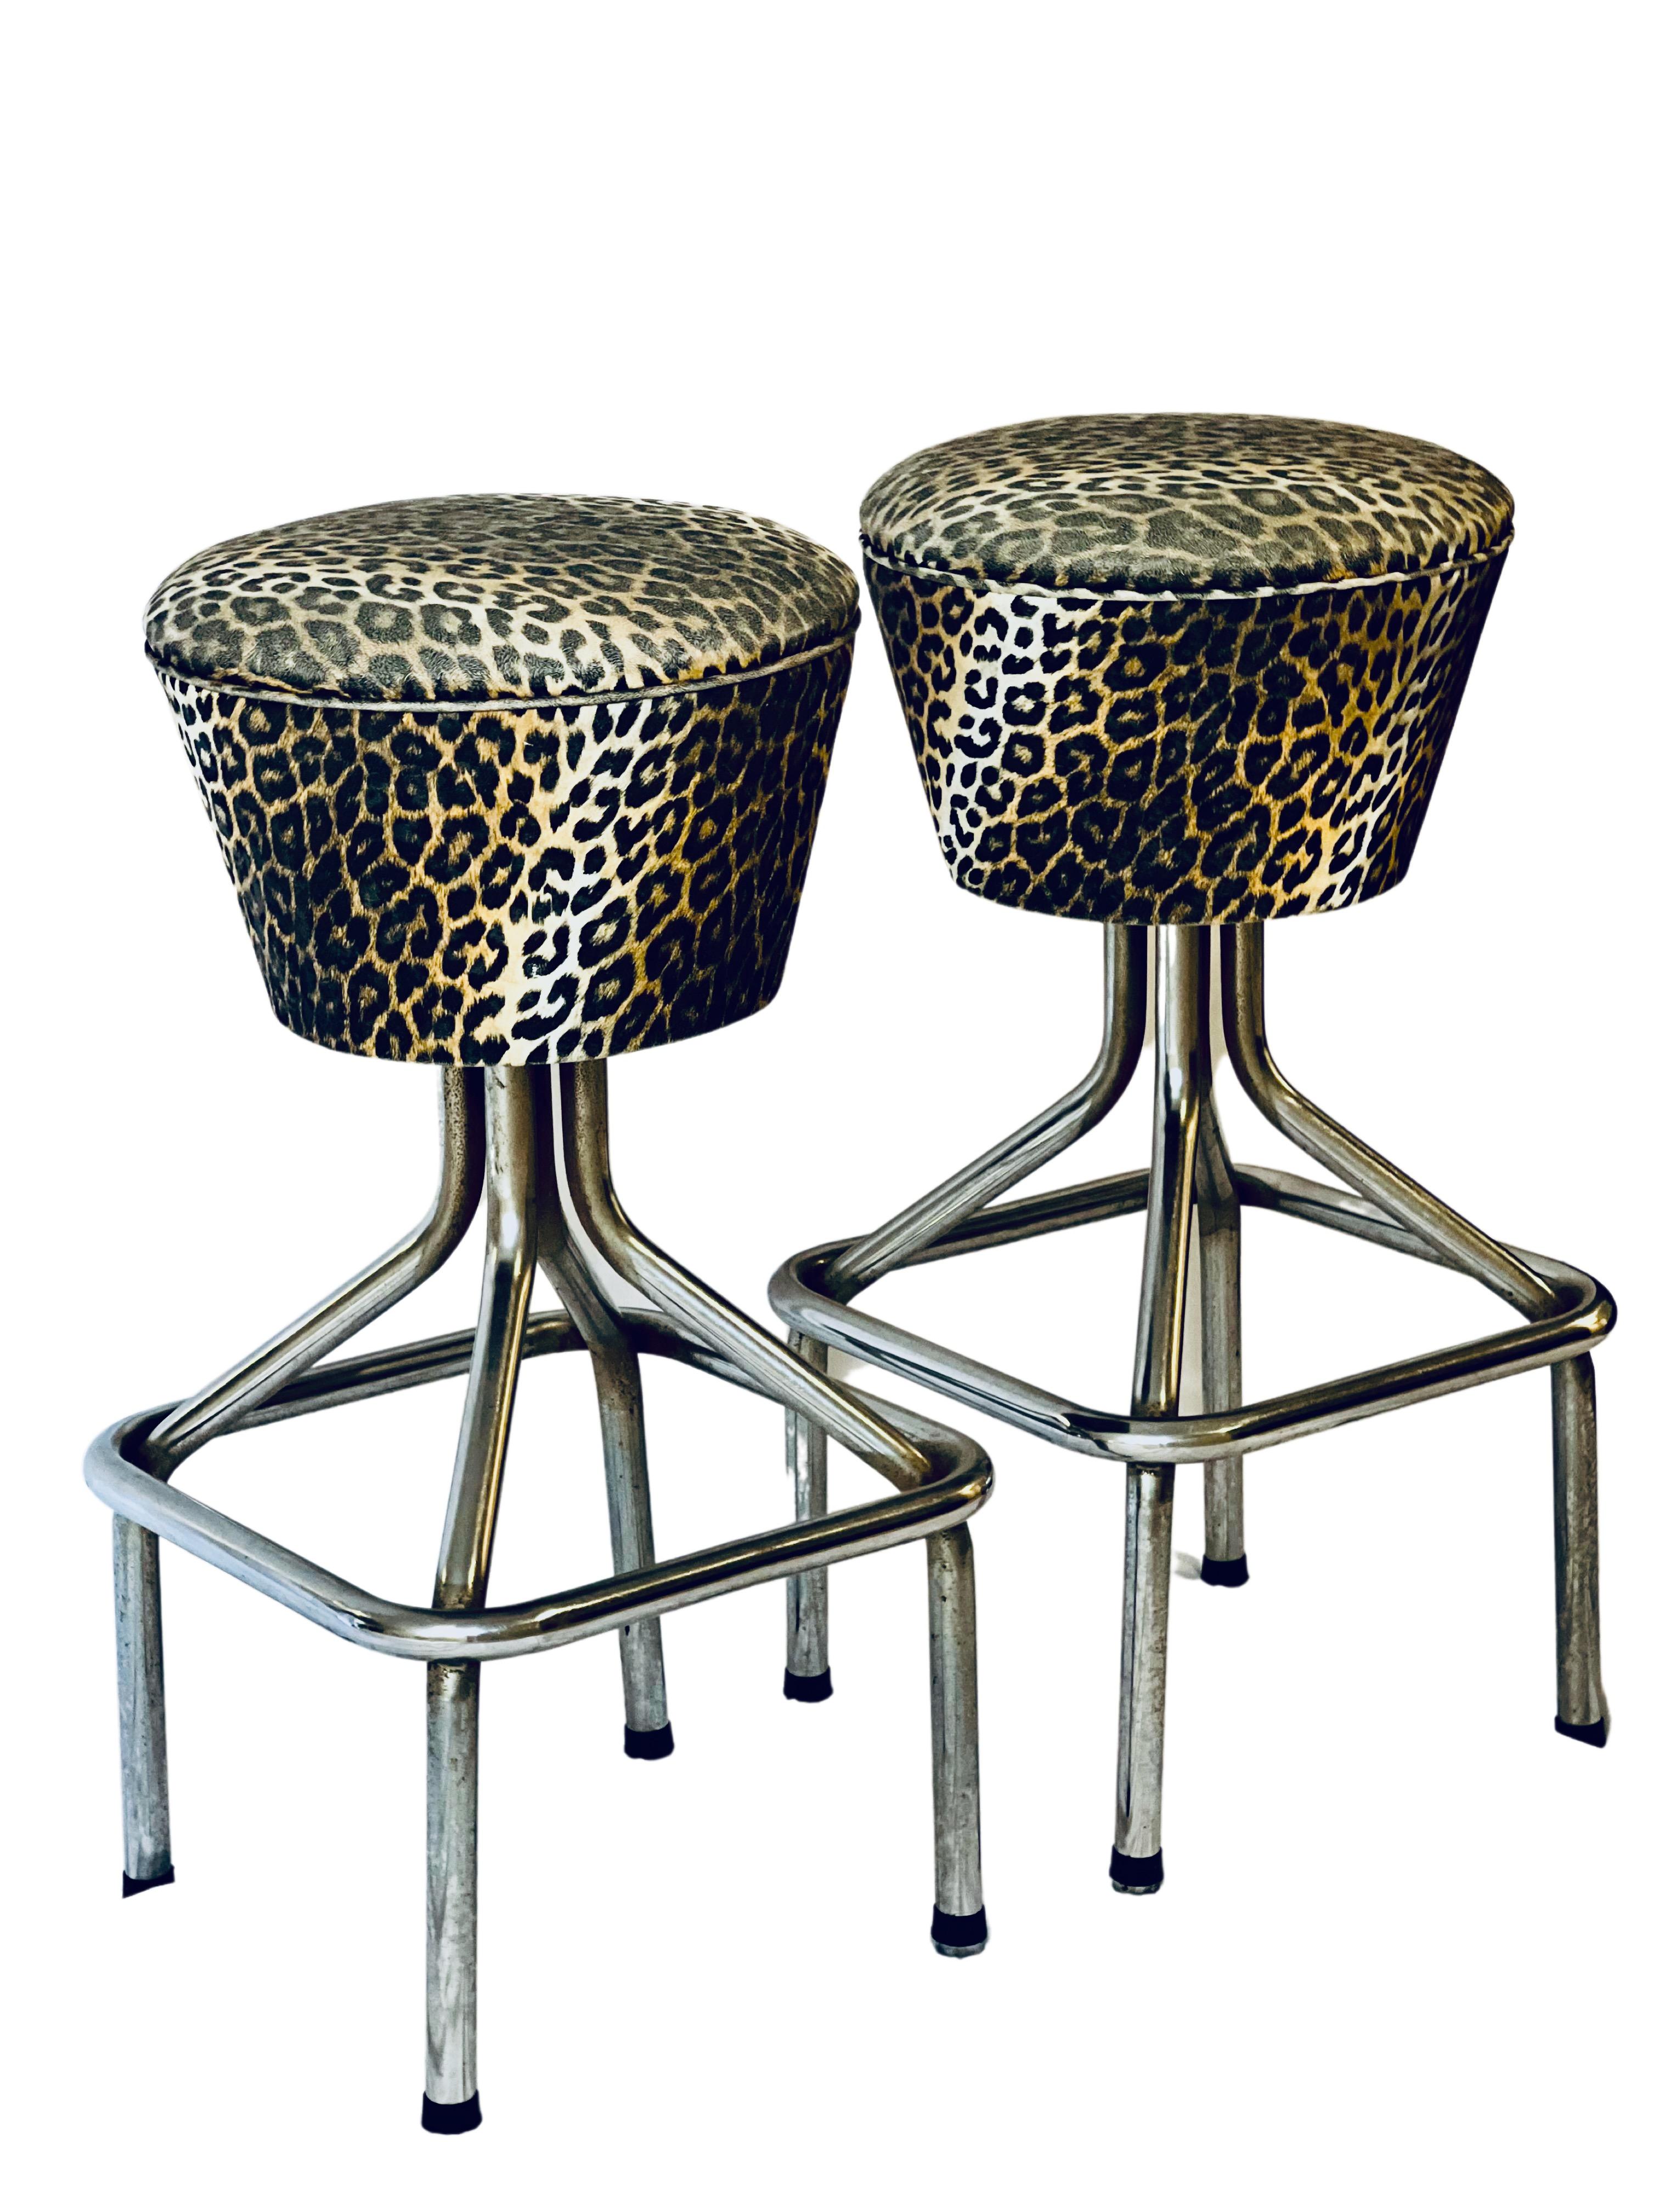 Fabulous pair of vintage swivel bar stools in faux leopard. 

The stools feature original fabric with a great print in good condition, no tears or stains. Unique design with an elongated and chunky tapered seat which swivels 360 degrees smoothly.